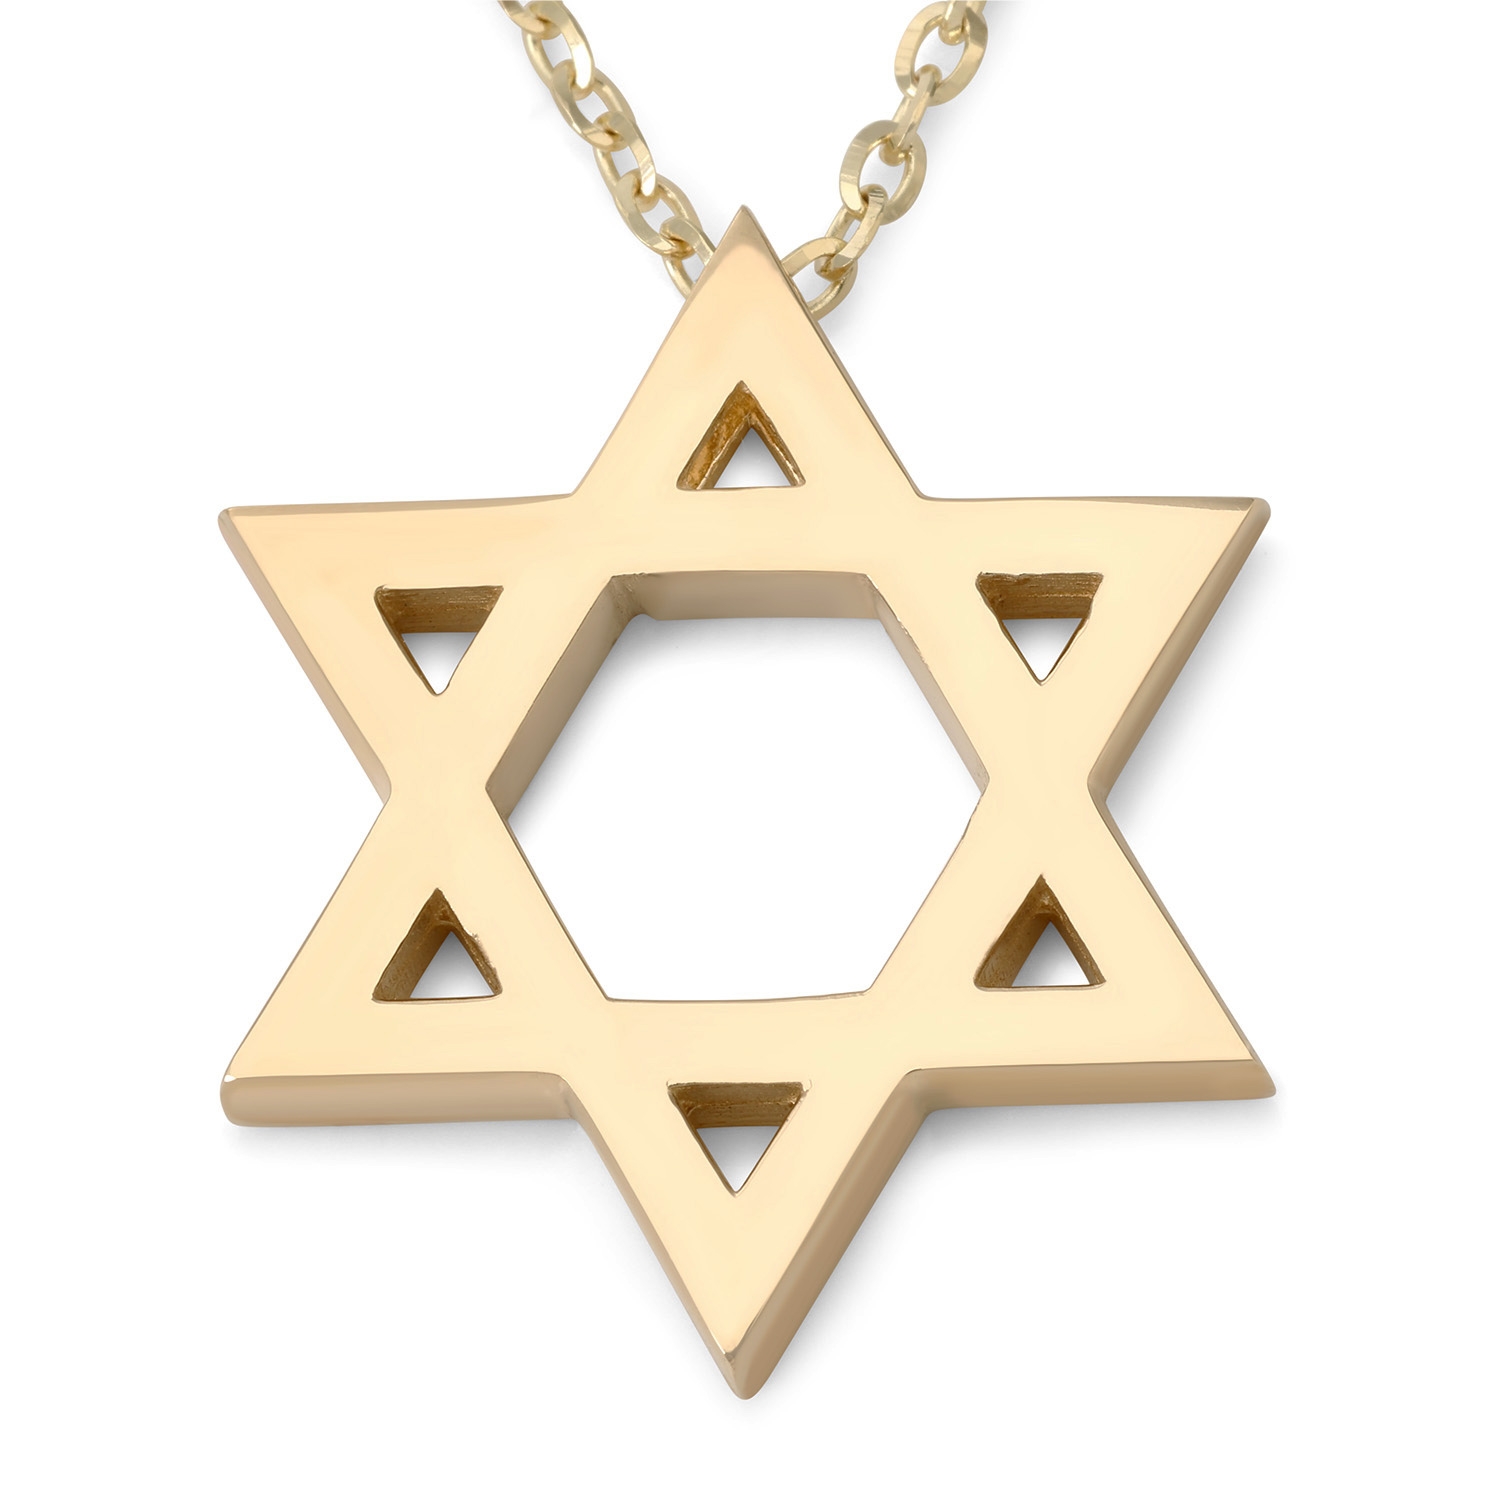 Deluxe 14K Gold Star of David Pendant Necklace - Unisex - 1